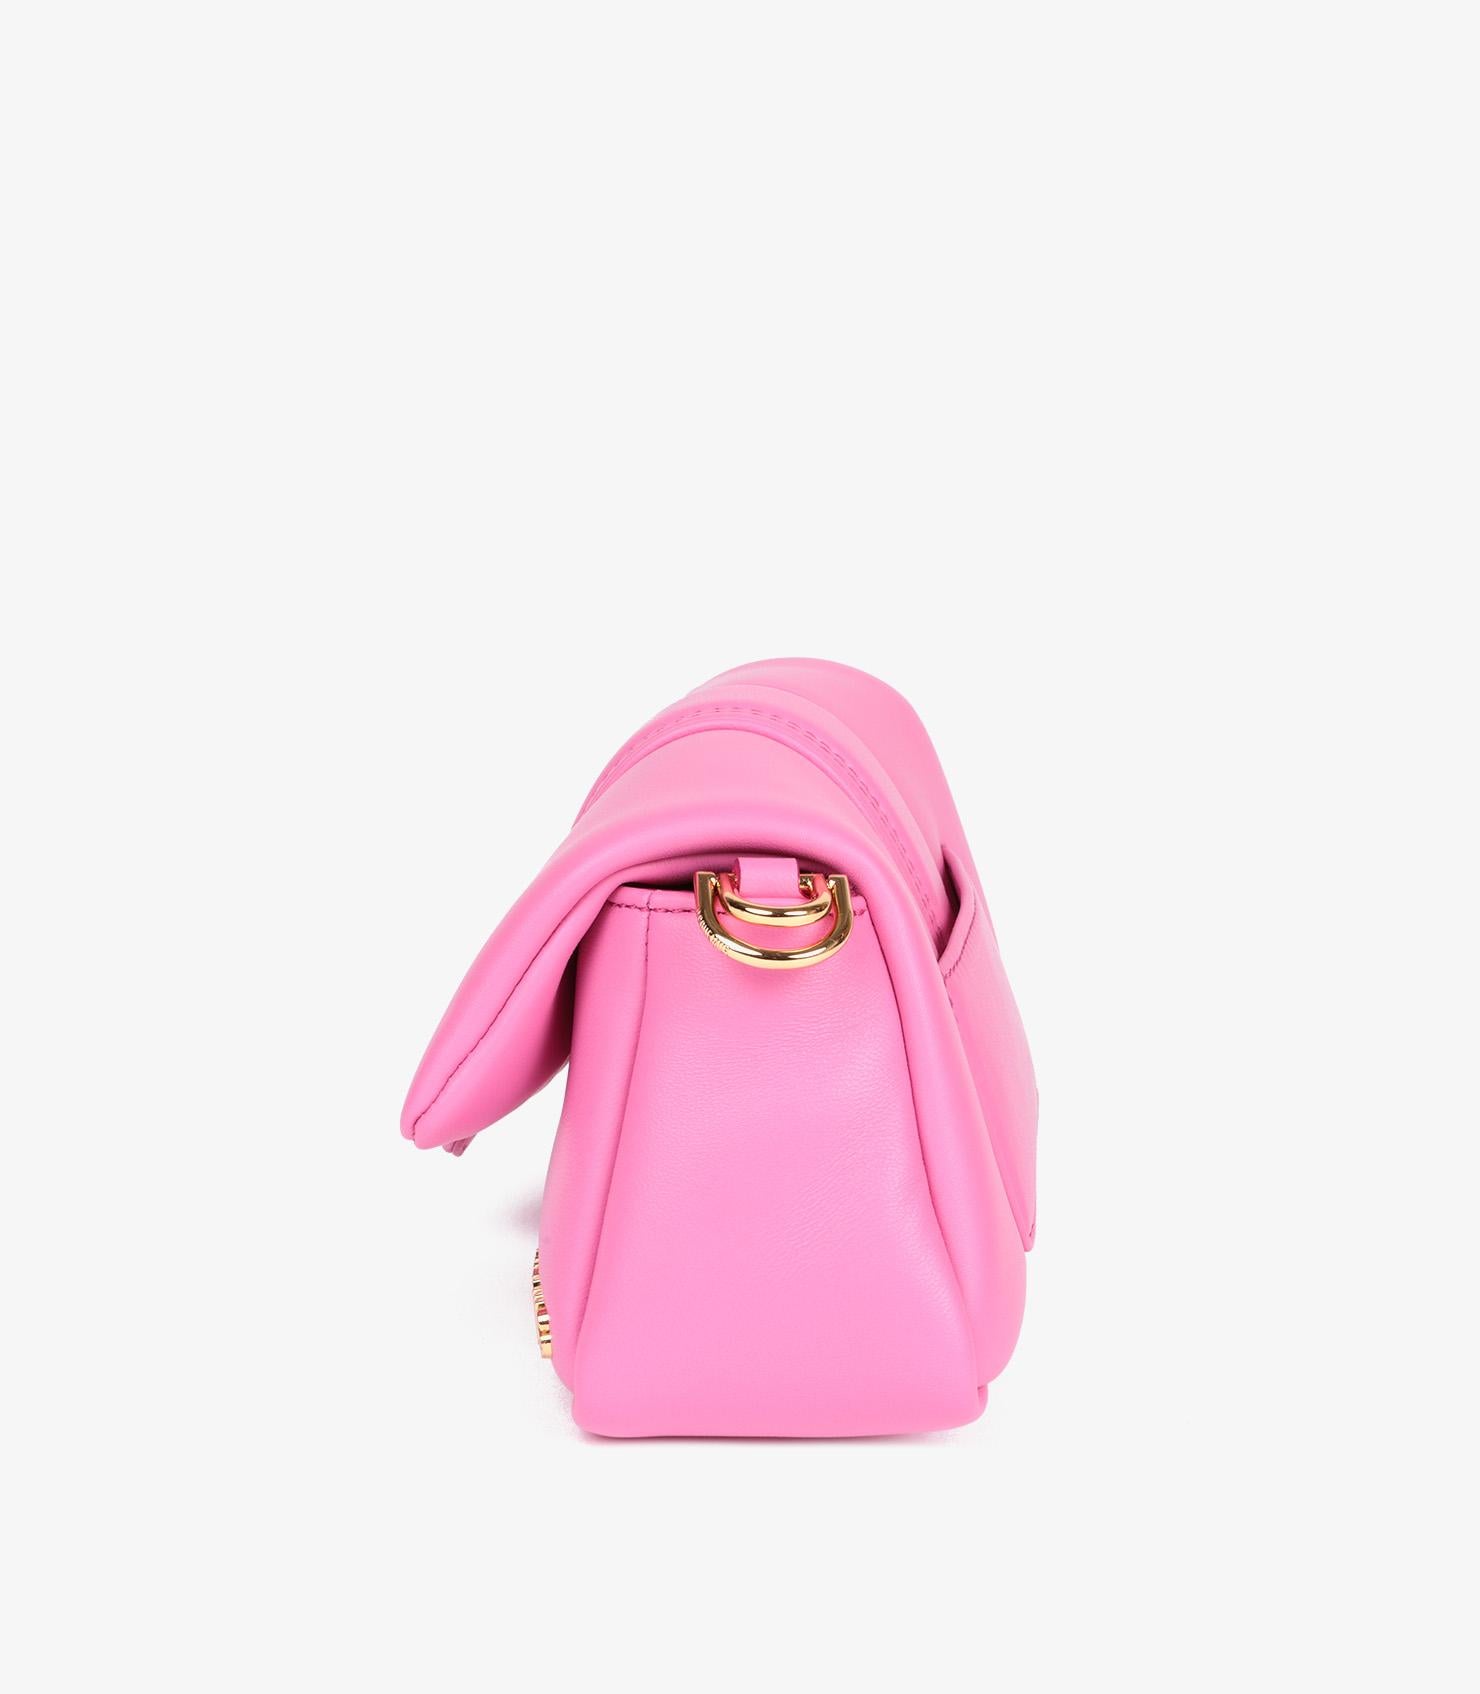 Jacquemus Neon Pink Lambskin Leather Le Petit Bambimou In Excellent Condition For Sale In Bishop's Stortford, Hertfordshire